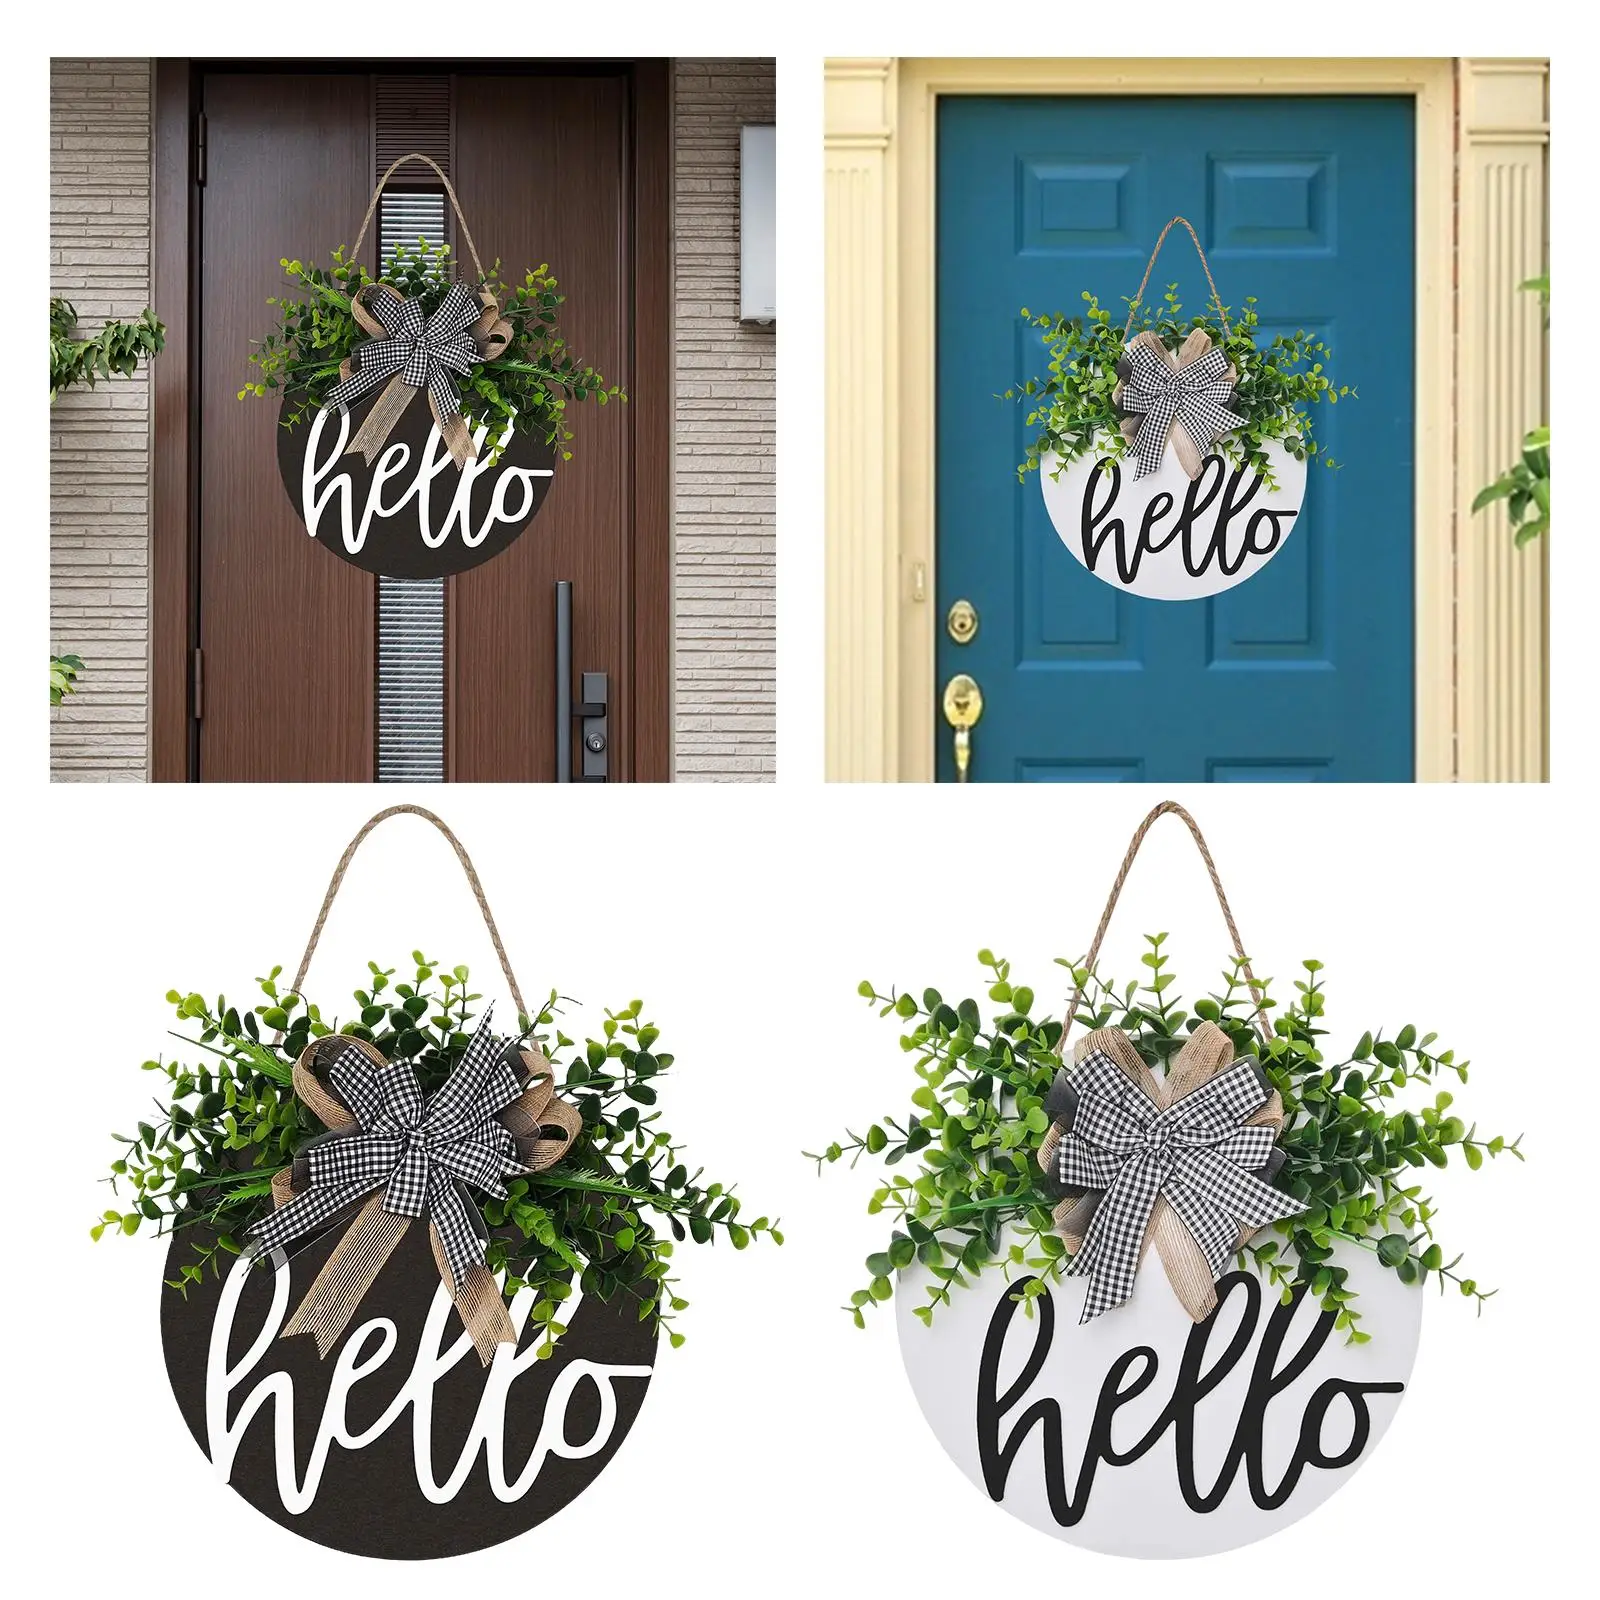 Welcome Wreath Sign Farmhouse Wreaths Round Wood Signs Decorative for Spring Patio Outdoor Indoor Front Door Wedding